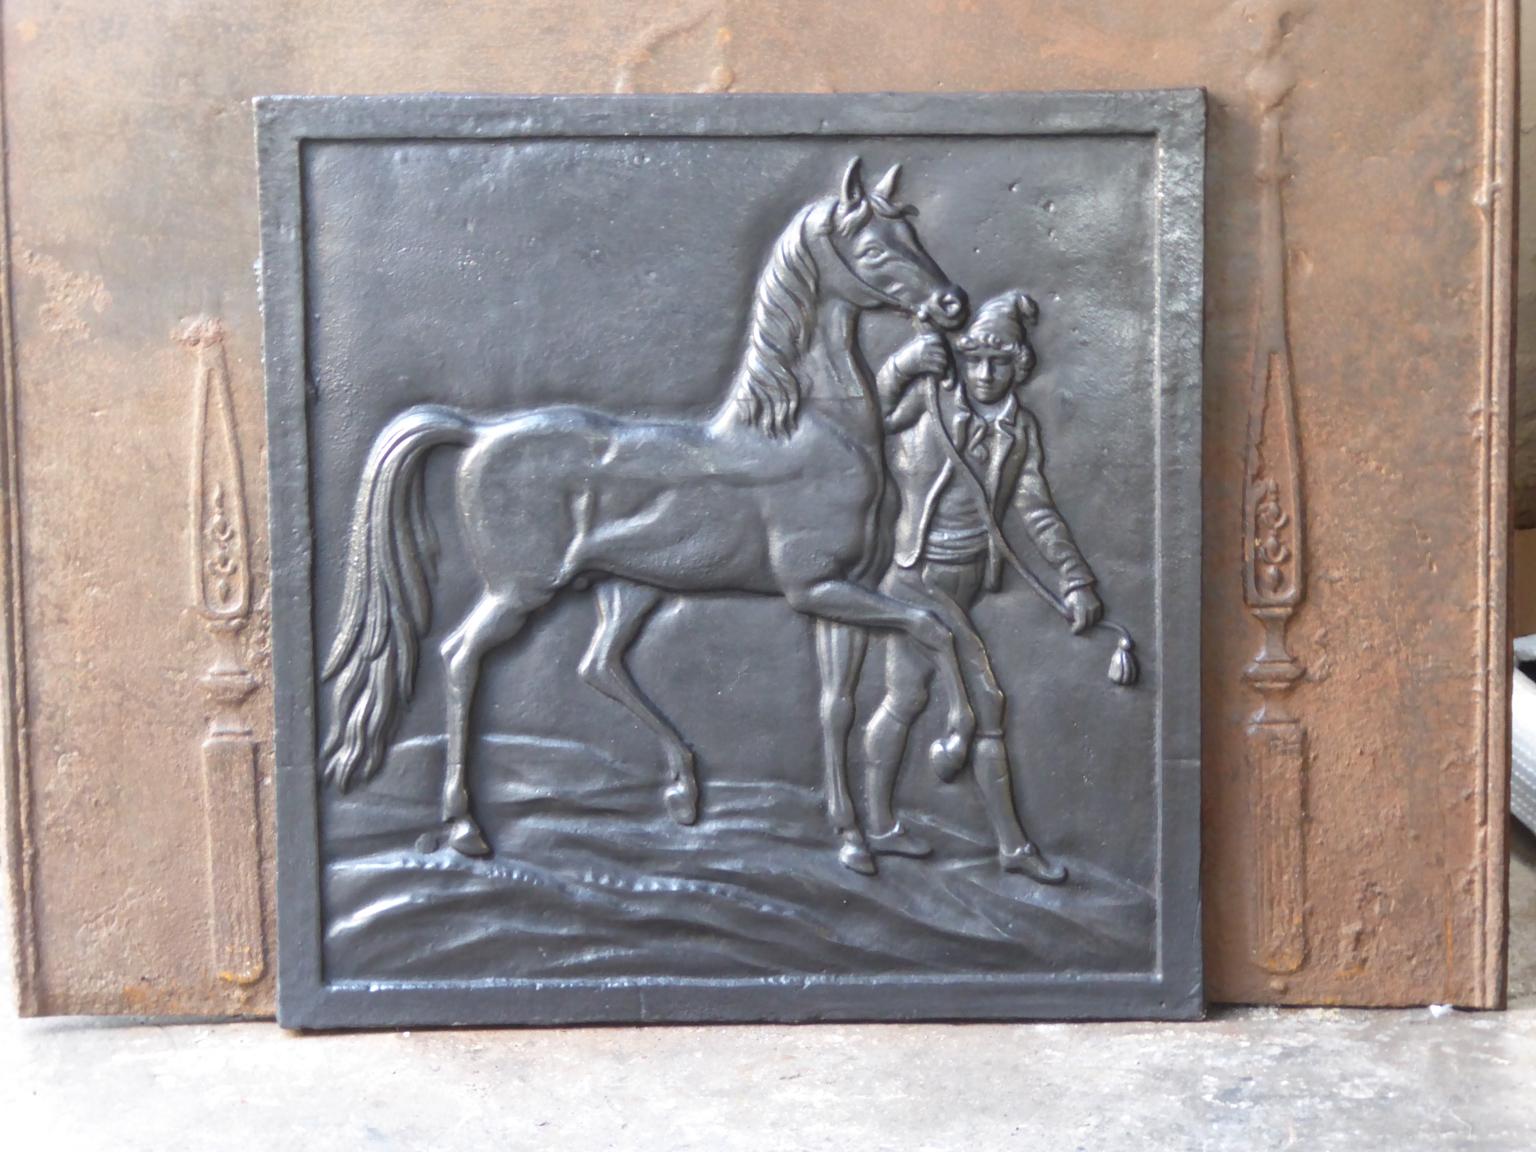 20th century French Art Nouveau fireback with a horse.

The fireback is made of cast iron. The patina is black / pewter. The fireback is in a good condition and does not have any cracks.